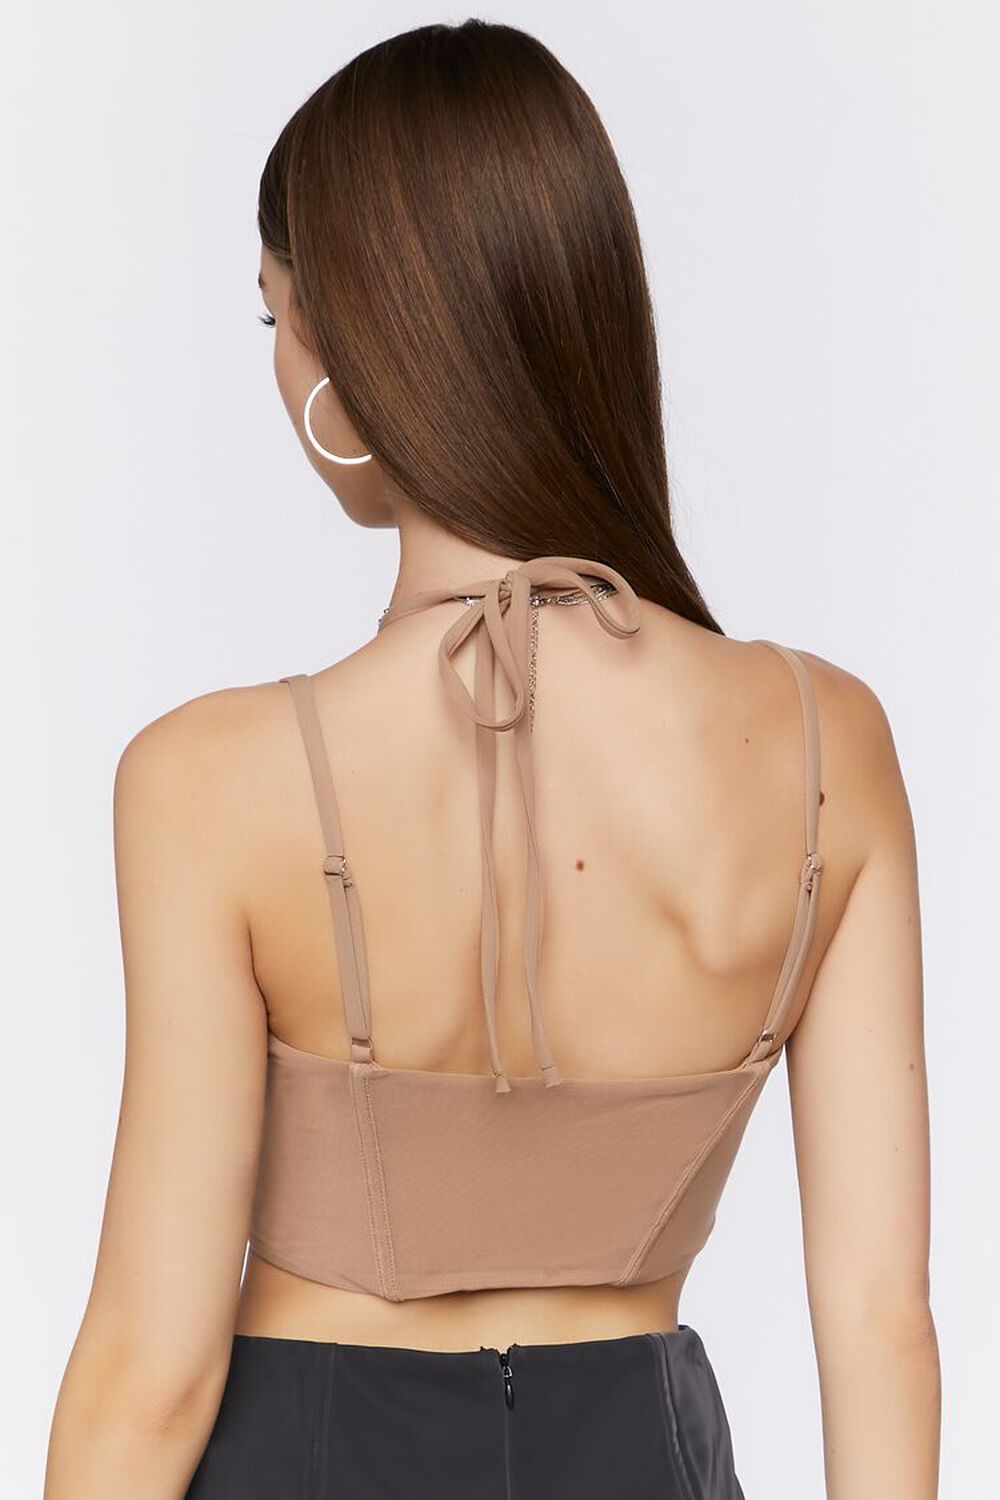 Cropped Cutout Bustier Cami, image 3